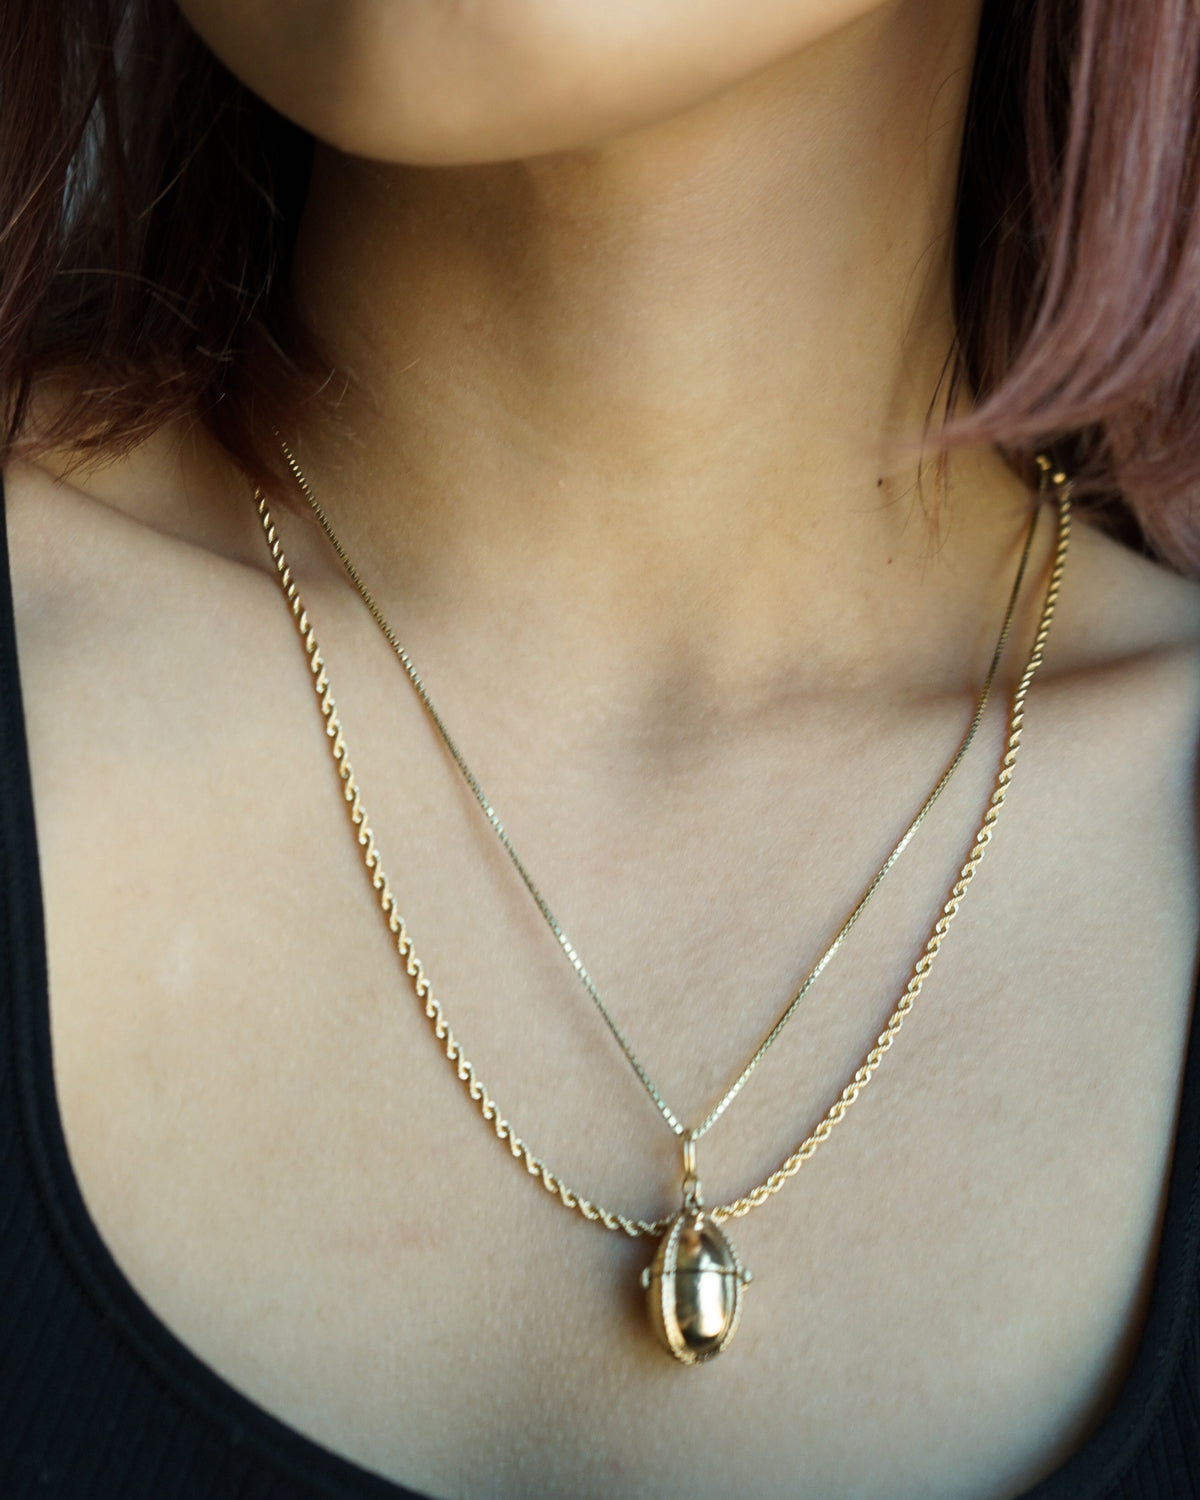 14k Gold Rope Chain Necklace